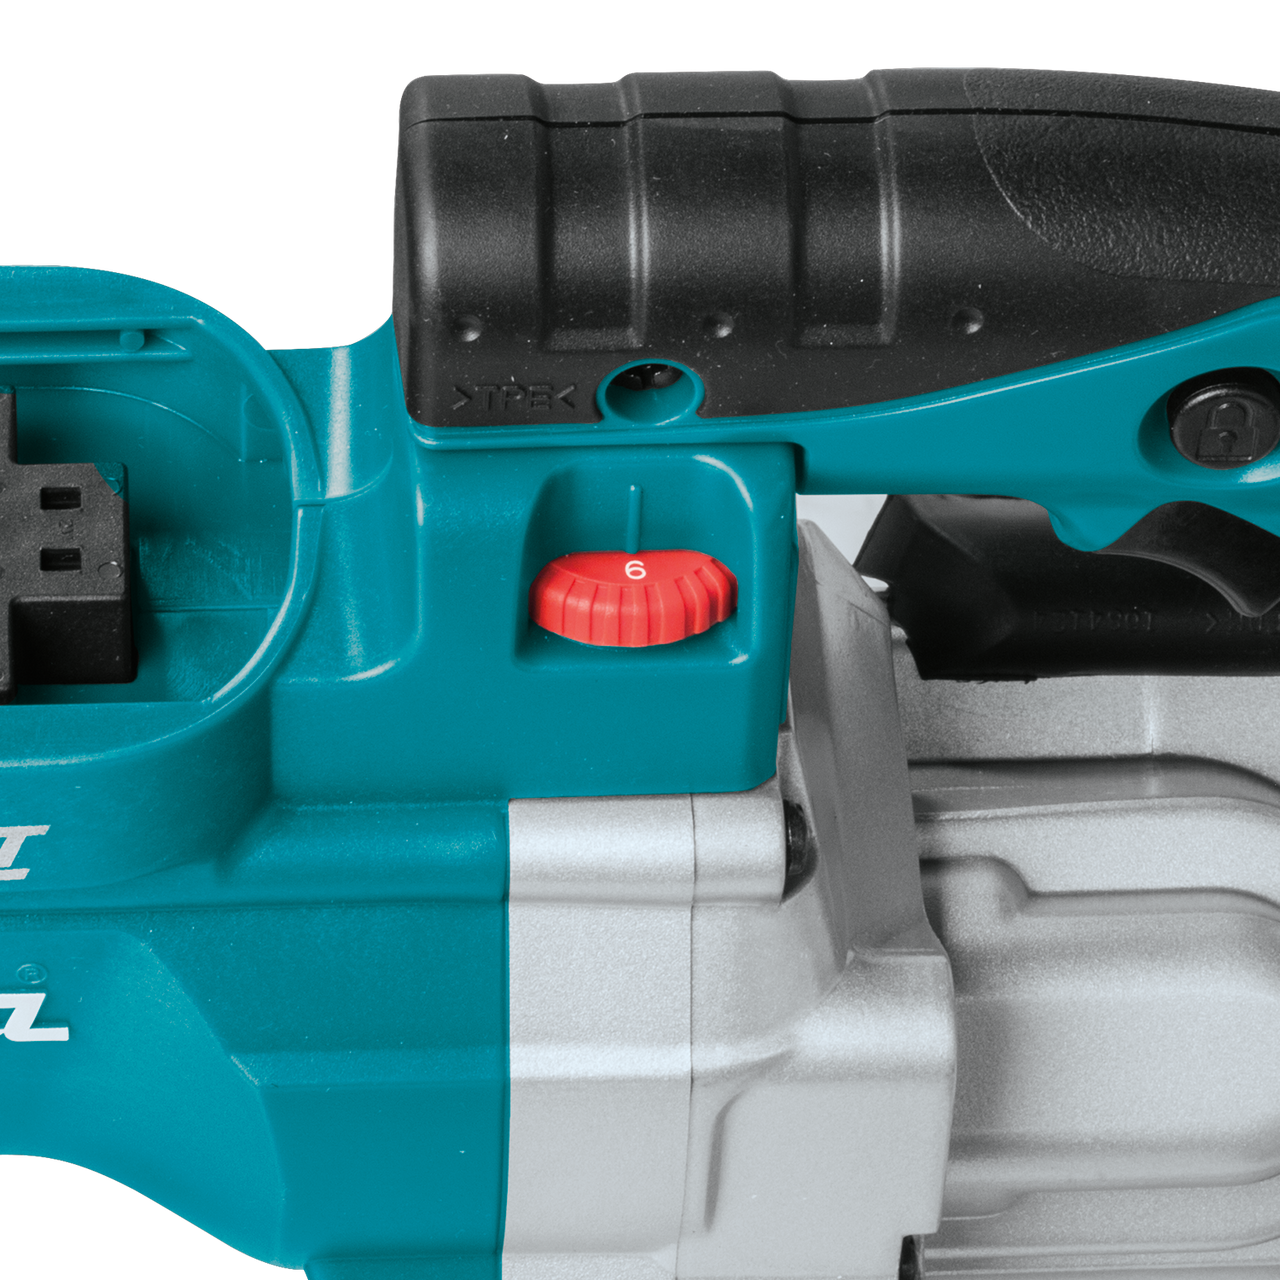 Makita XBP02Z 18V LXT Lithium-Ion Cordless Portable Band Saw, Tool Only - 1